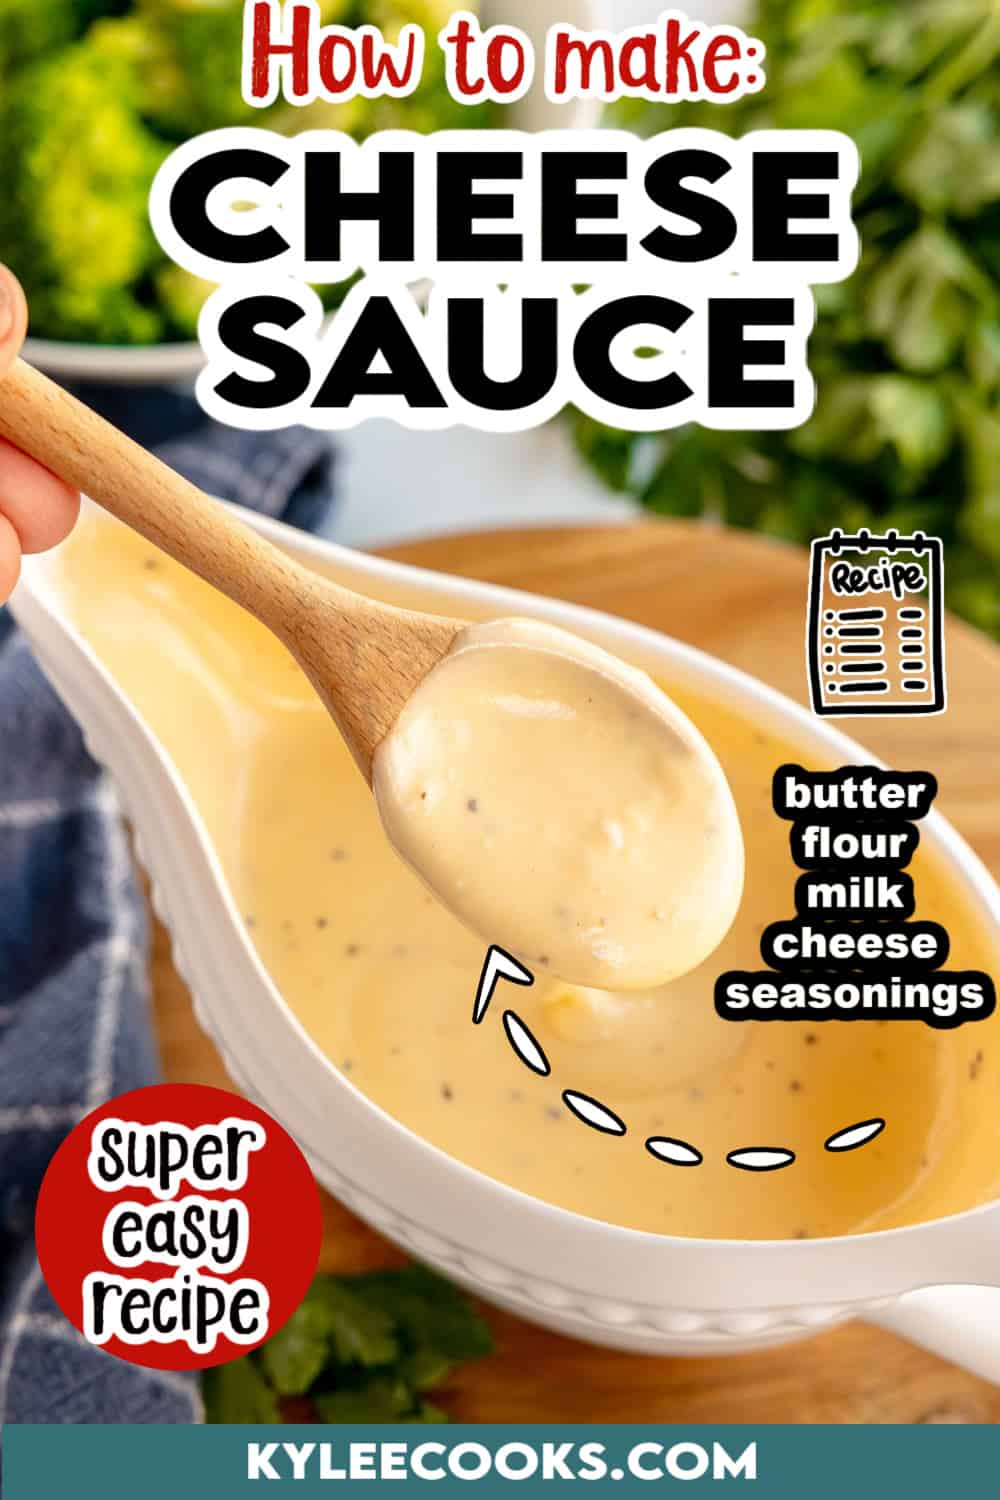 cheese sauce in a bowl with a wooden spoon with recipe name and ingredients overlaid in text.